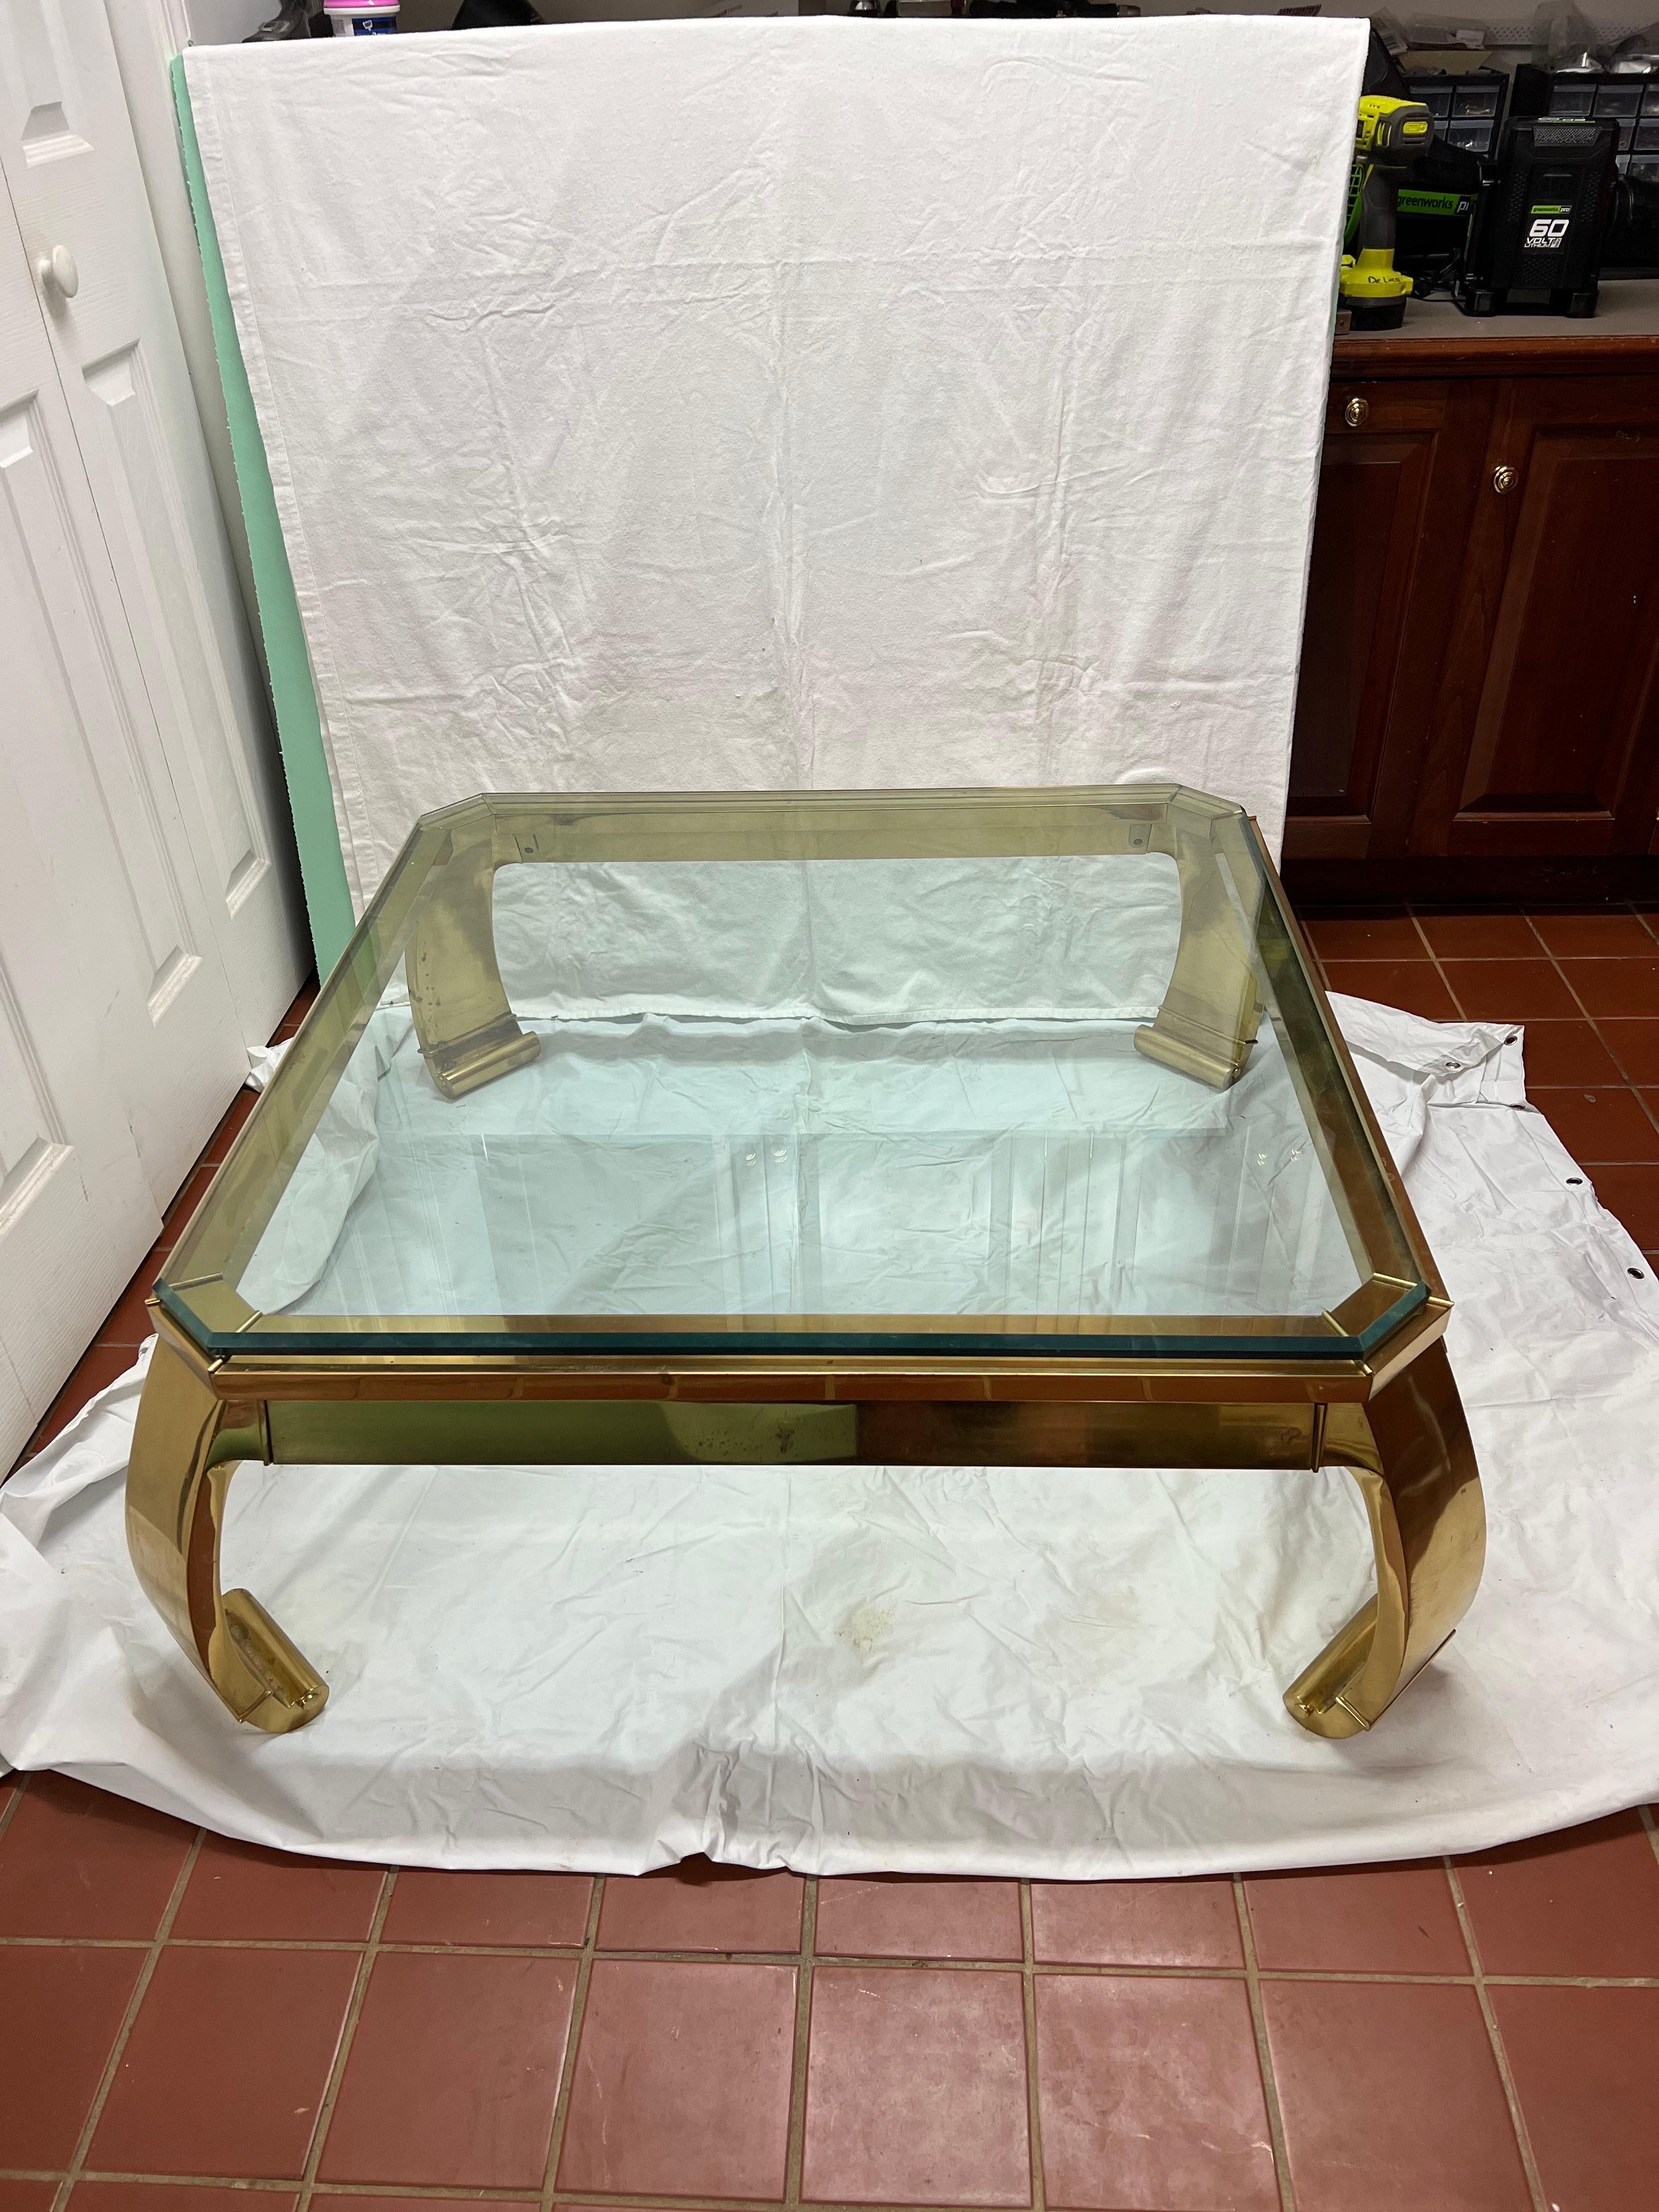 Mastercraft Solid Brass Ming Waterfall Coffee Table . Classic Asian inspired coffee table attributed to designer Karl Springer This beauty is made of solid forged brass. It is the epitome of 1970s sexy chic. The 3/4 inch beveled glass top sits on